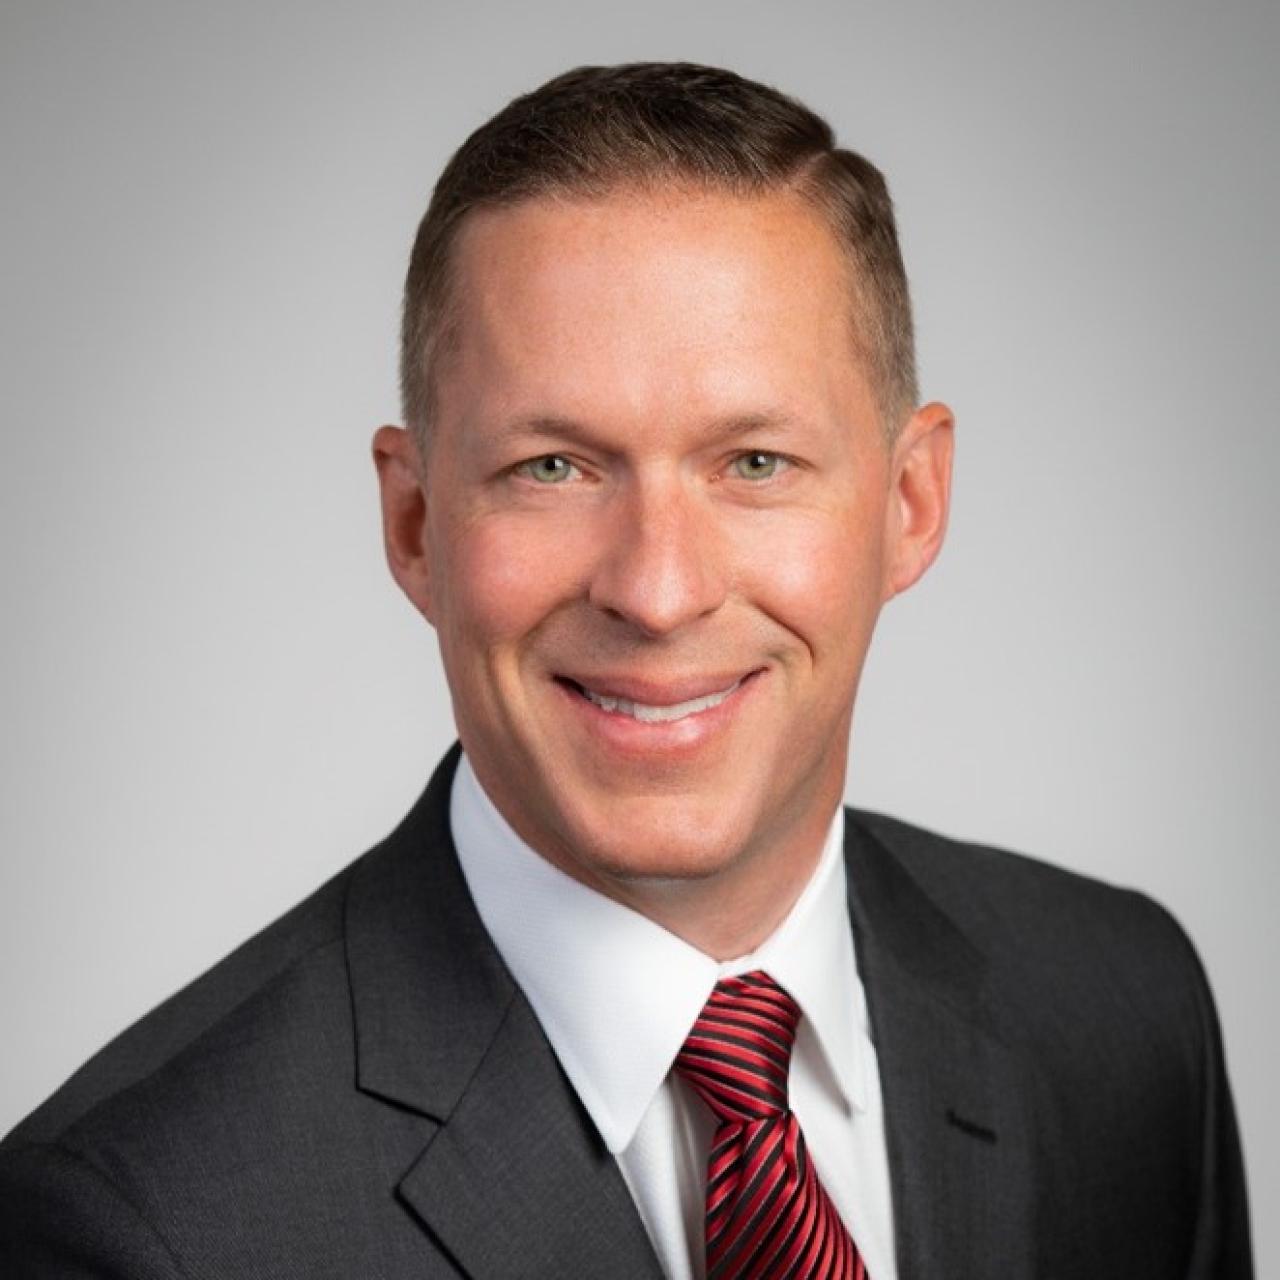 Head shot of Mike Triplett in suit with gray background